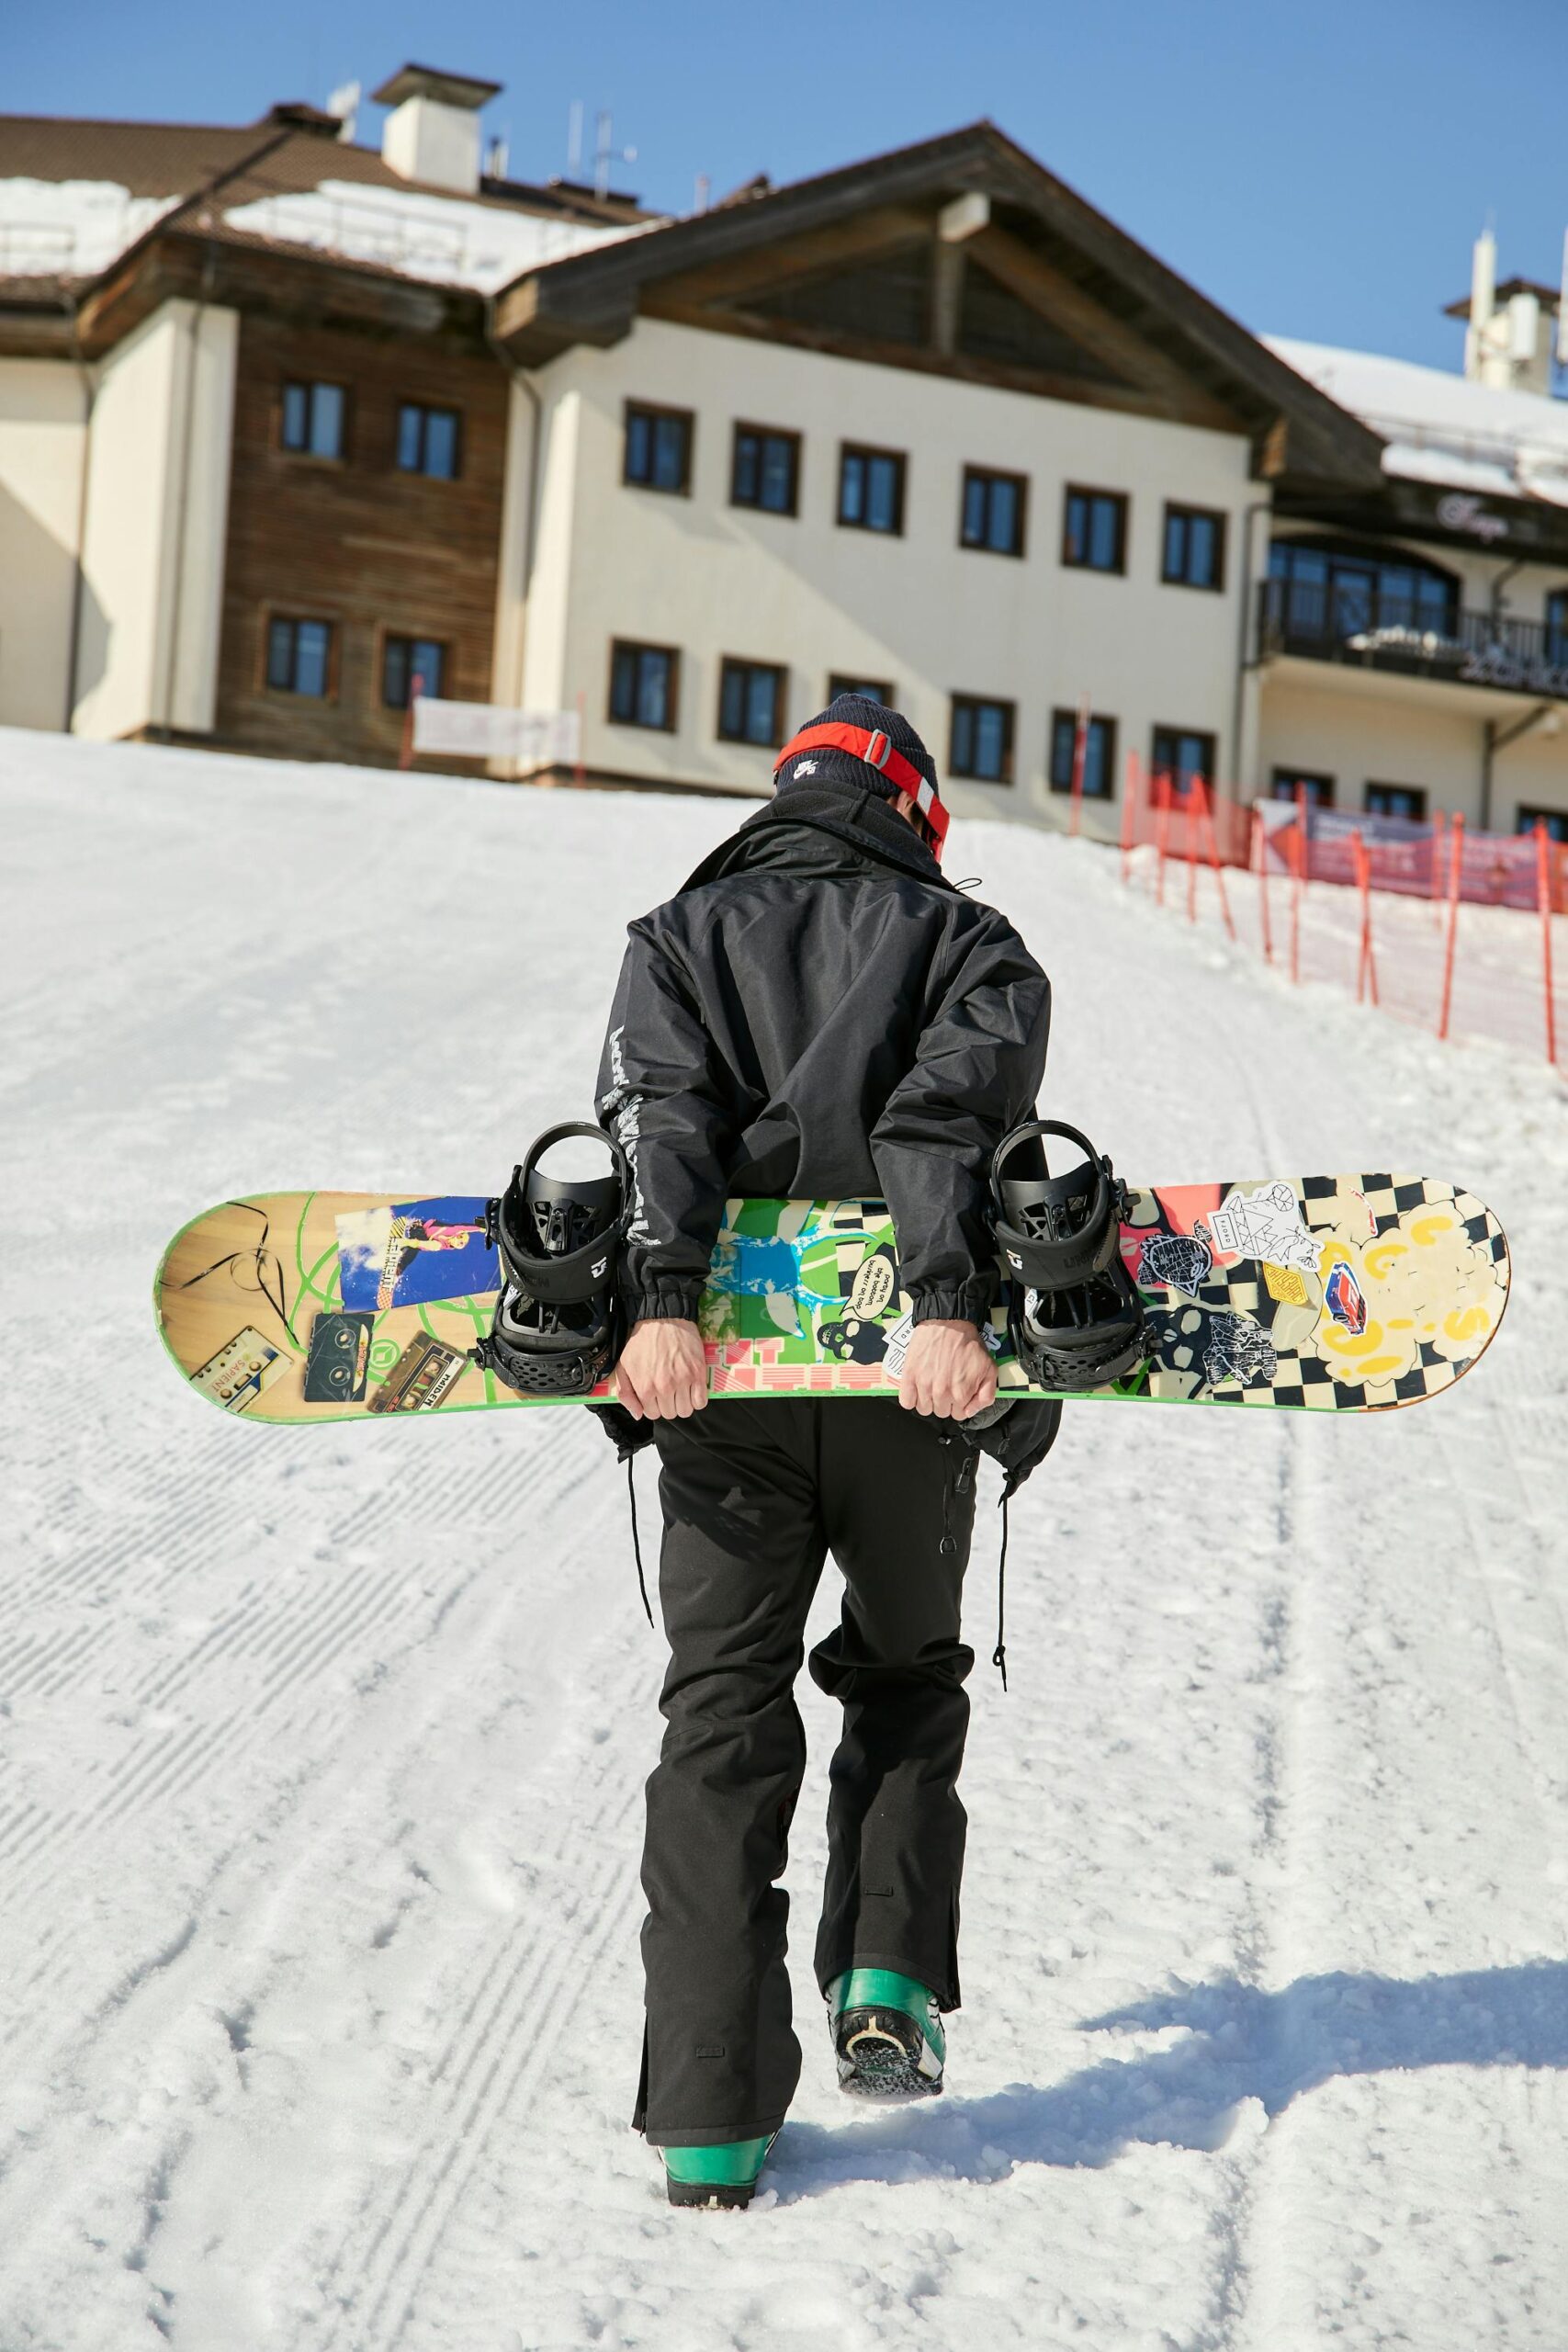 A Man Carrying a Snowboard